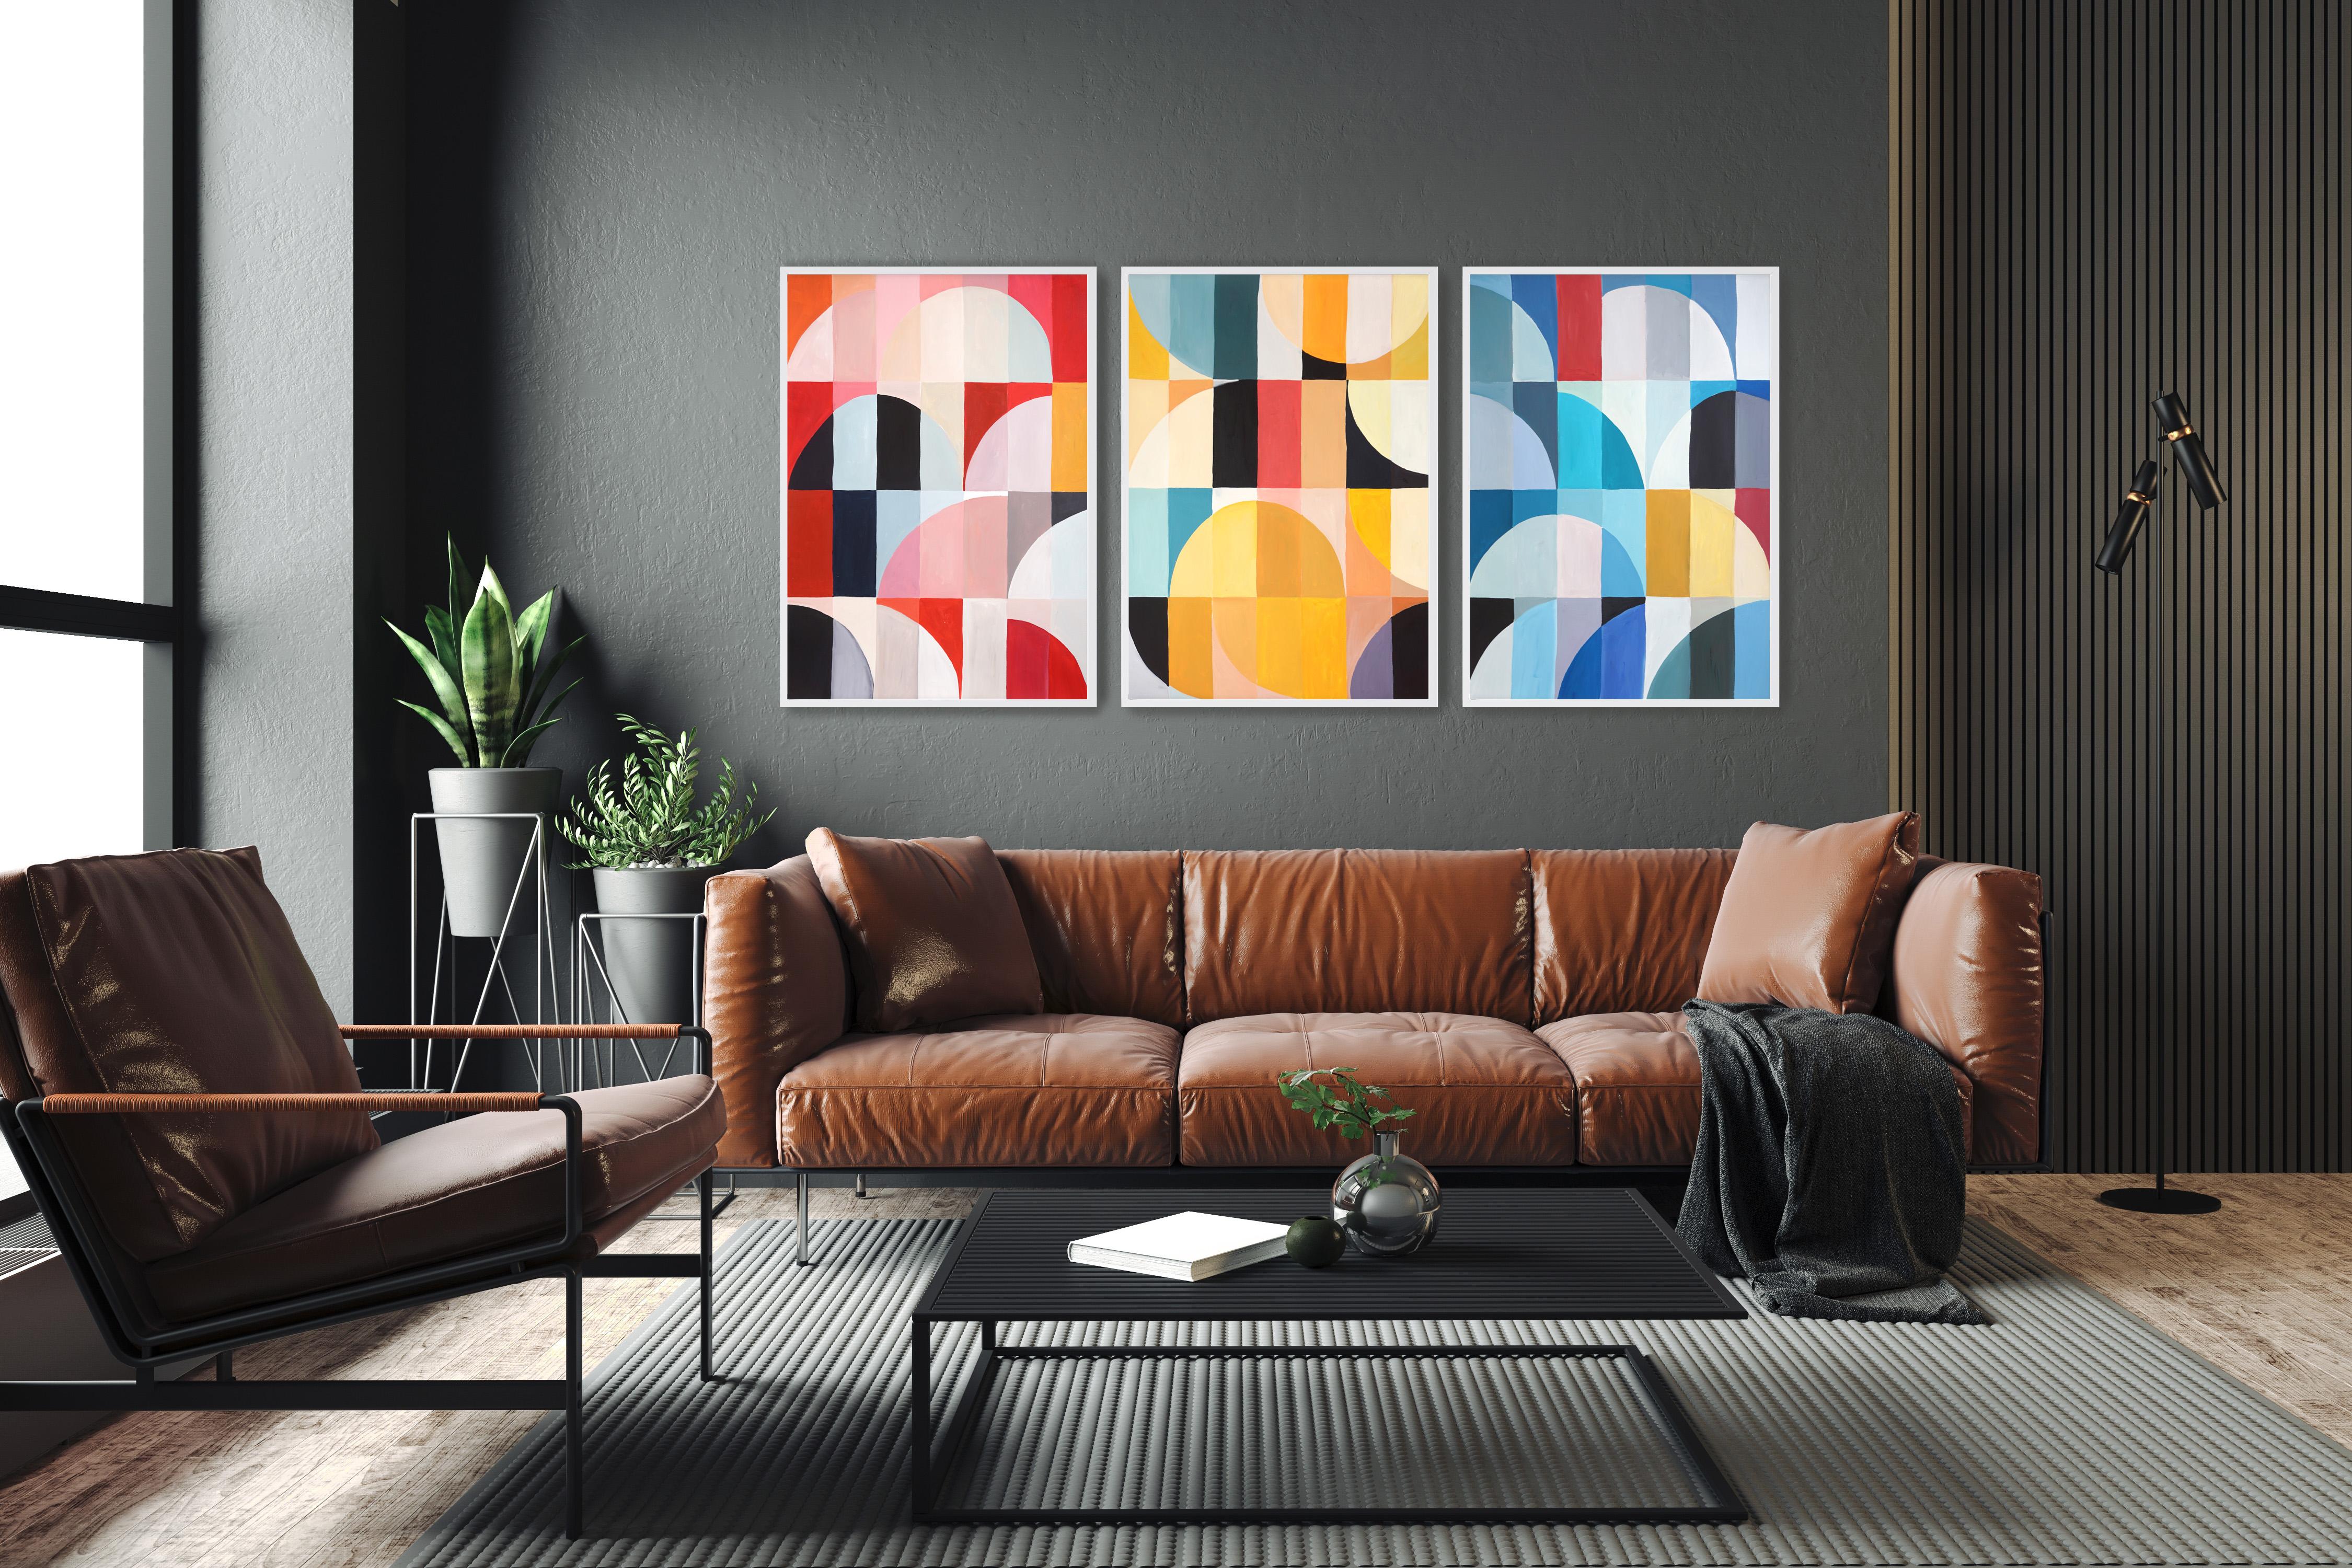 Primary Tones Umbrella Shades, Yellow, Blue and Red Bauhaus Grid Large Triptych - Painting by Natalia Roman